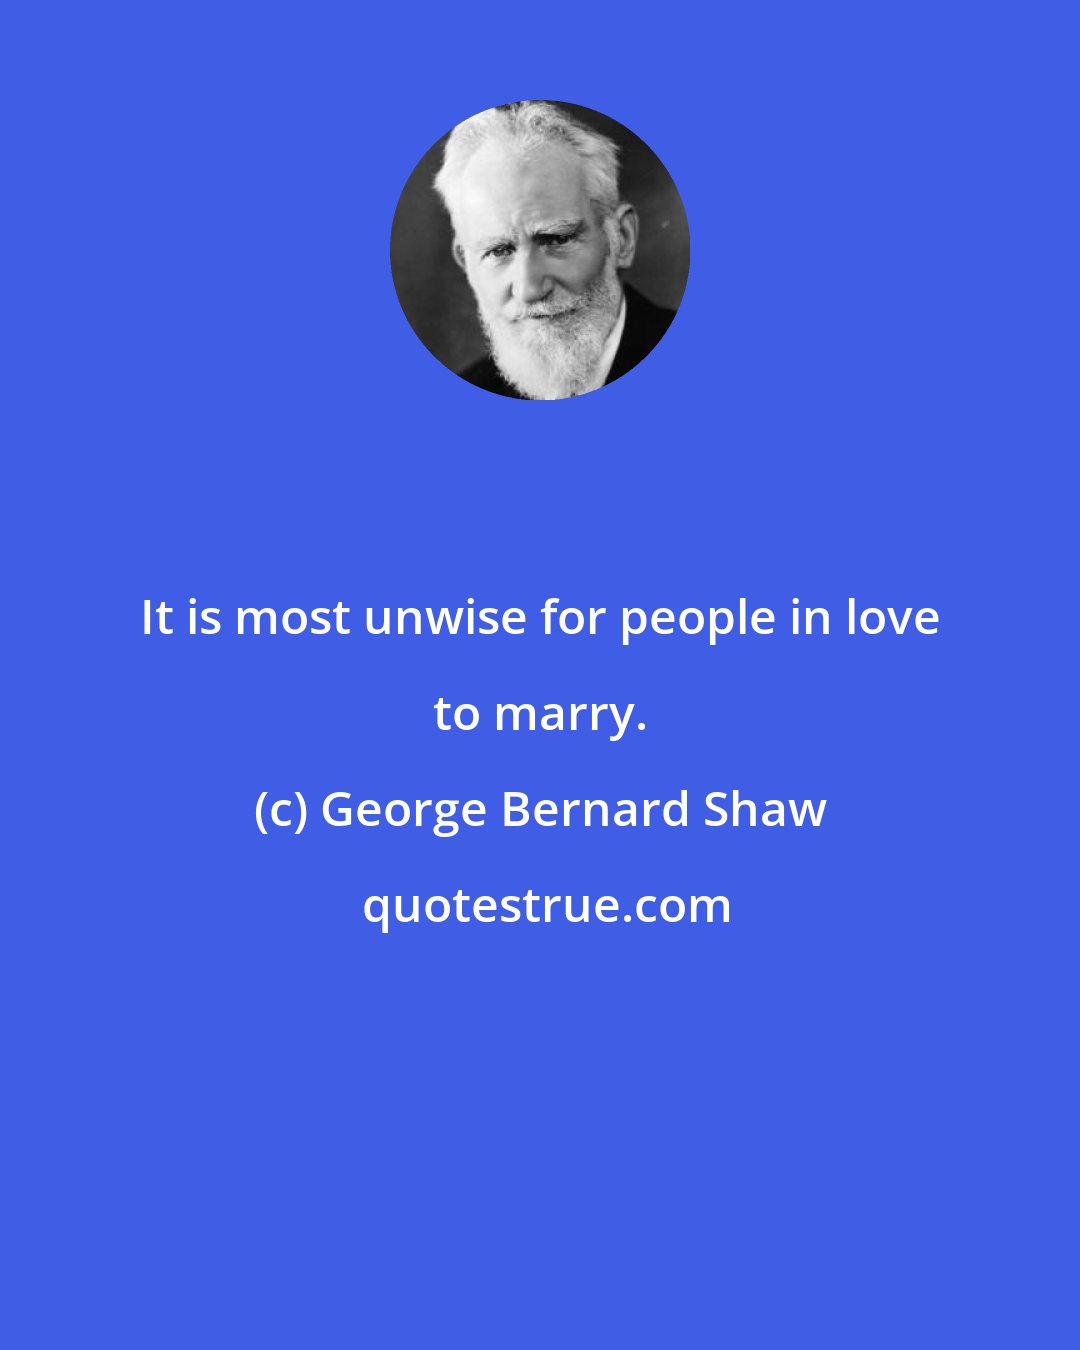 George Bernard Shaw: It is most unwise for people in love to marry.